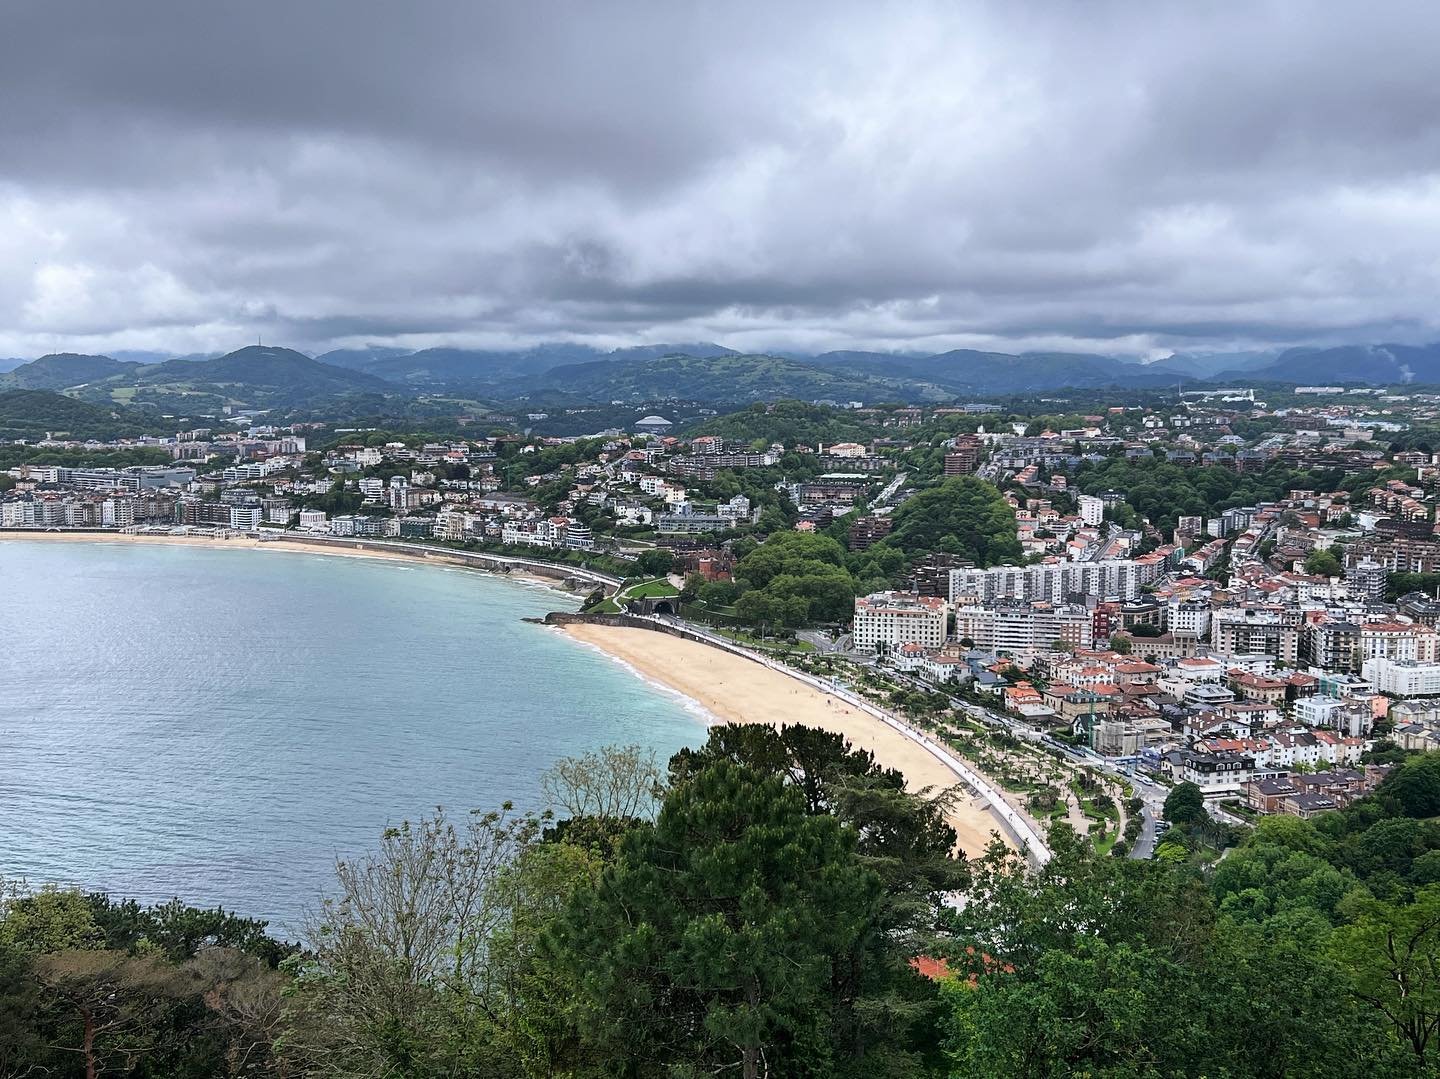 The Canucks are out 😭 so I&rsquo;ll just enjoy the greens and blues of the northern coast of Spain instead 💚💙

#postcardfrom #sansebastian #spain #beach #cityscape